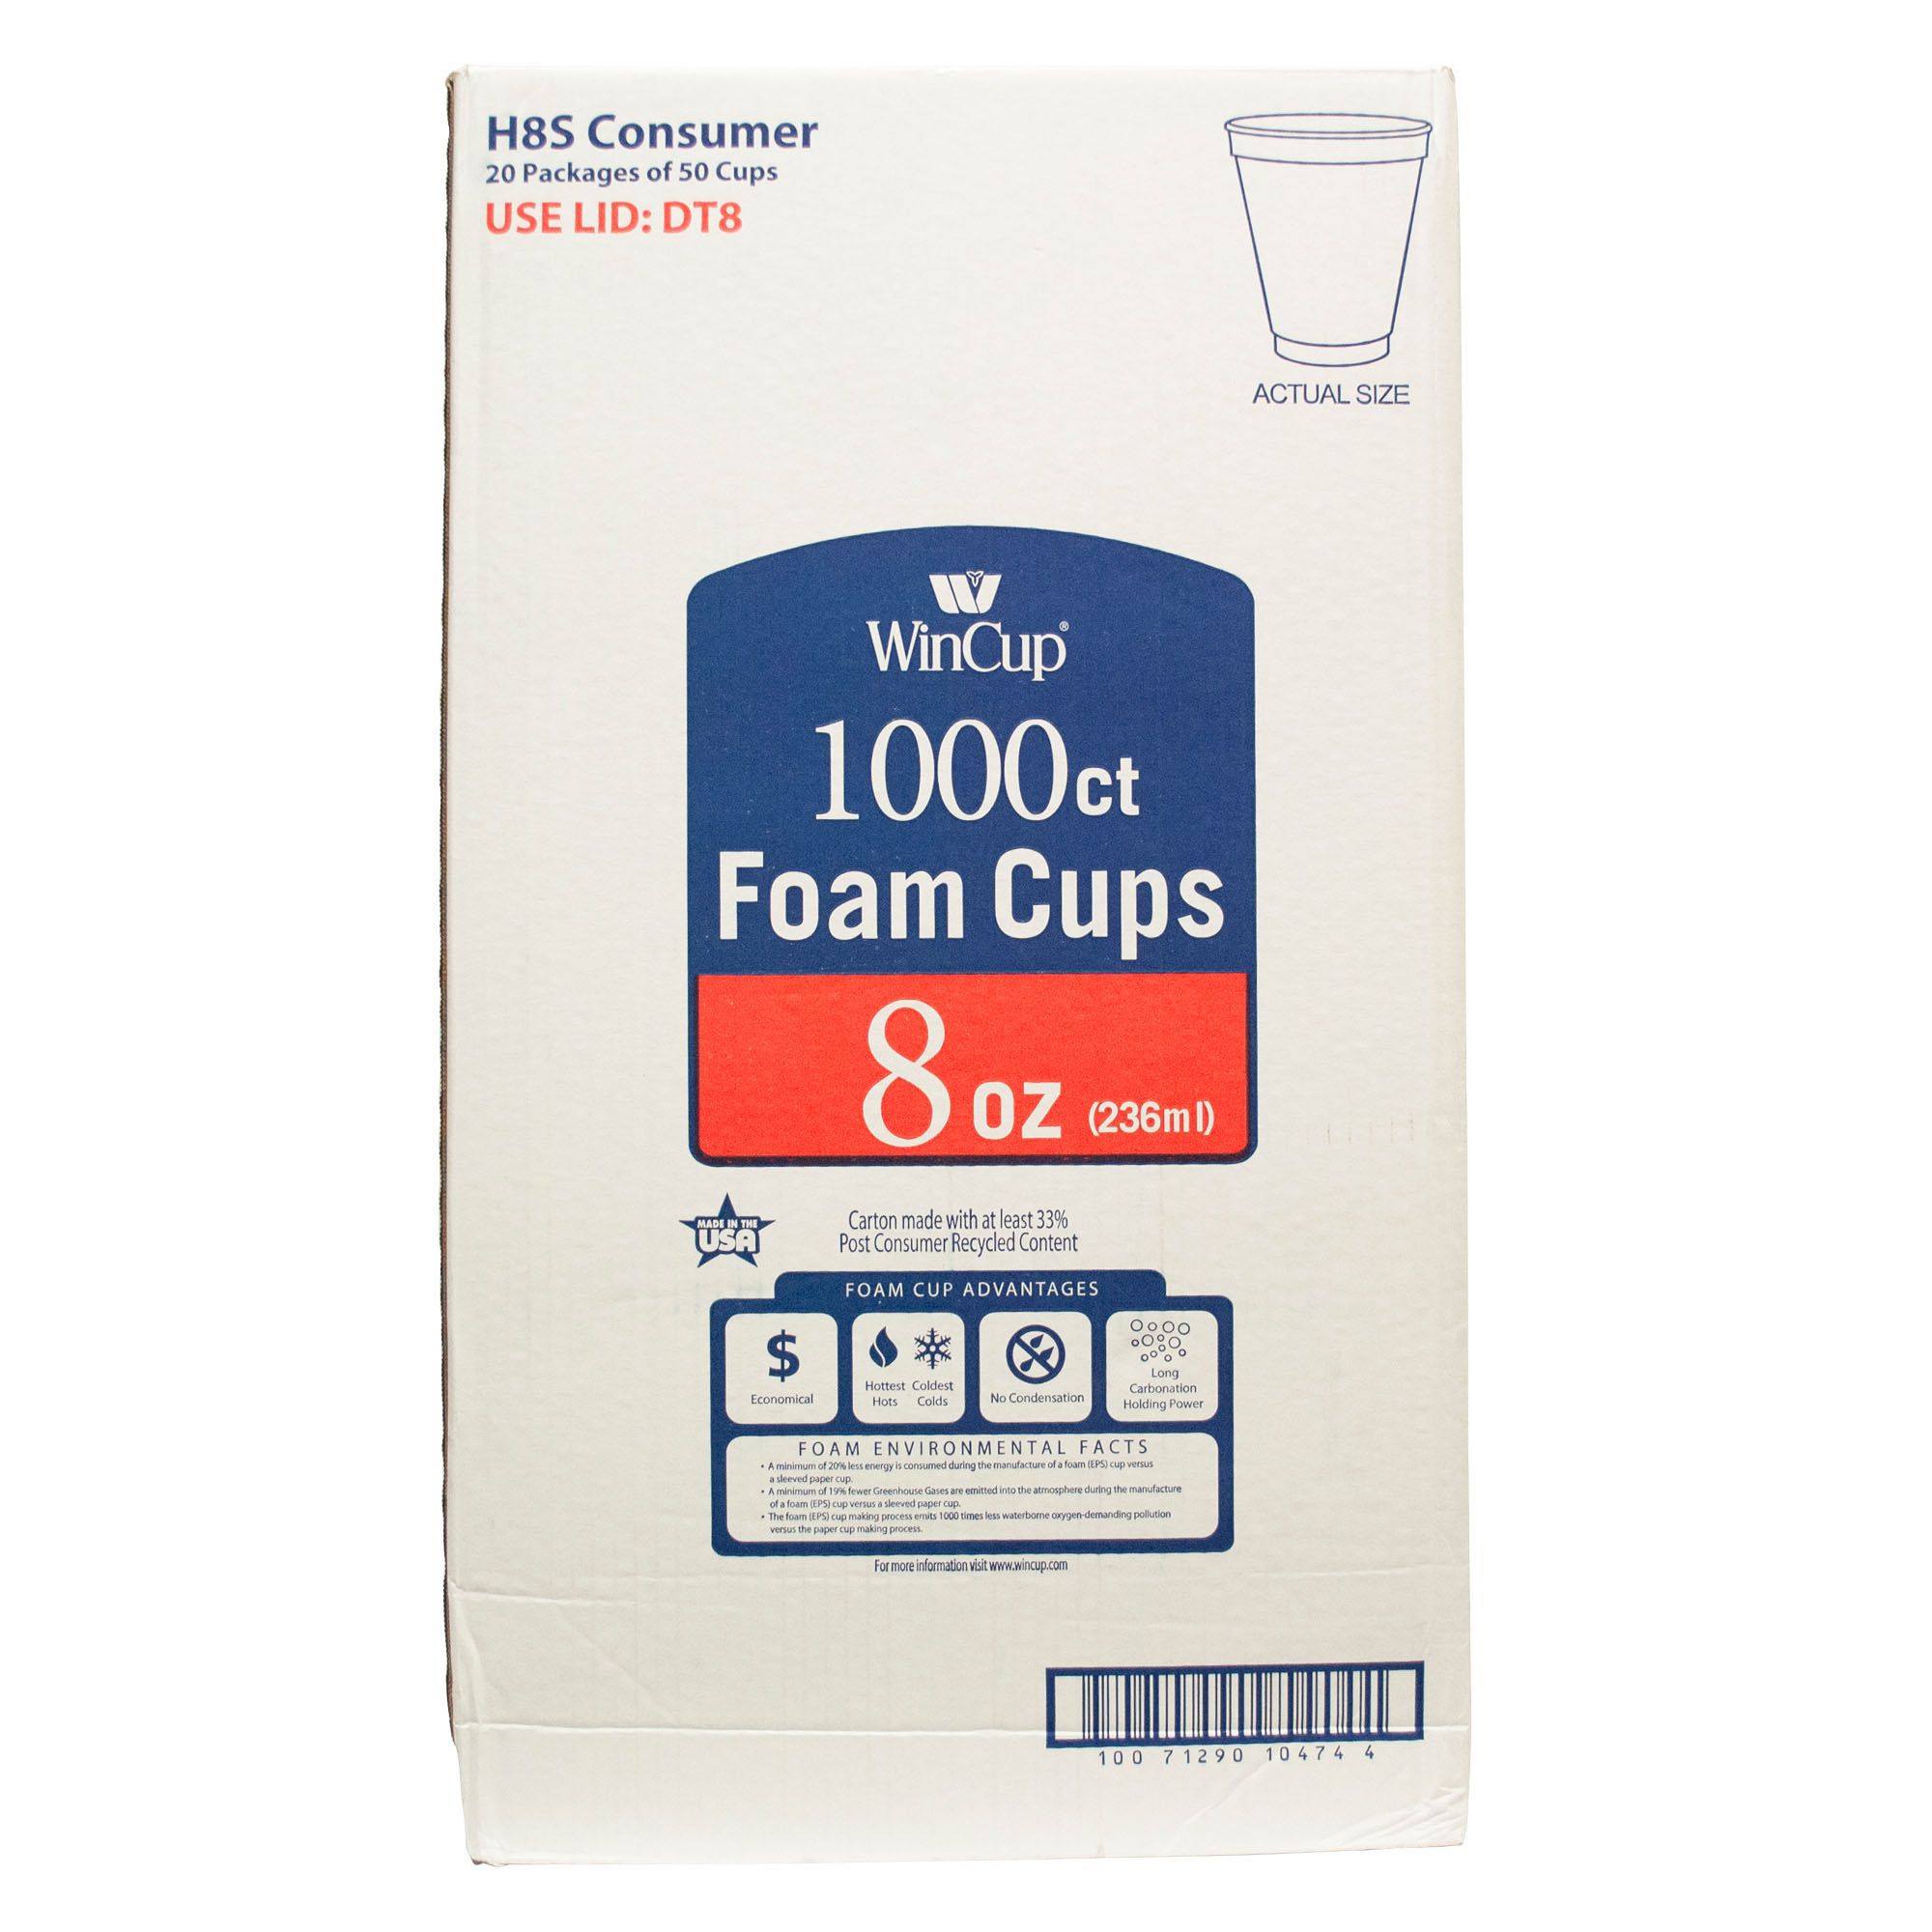 Daily Chef Heavy Duty Foodservice Foil (500ft.) - Sam's Club